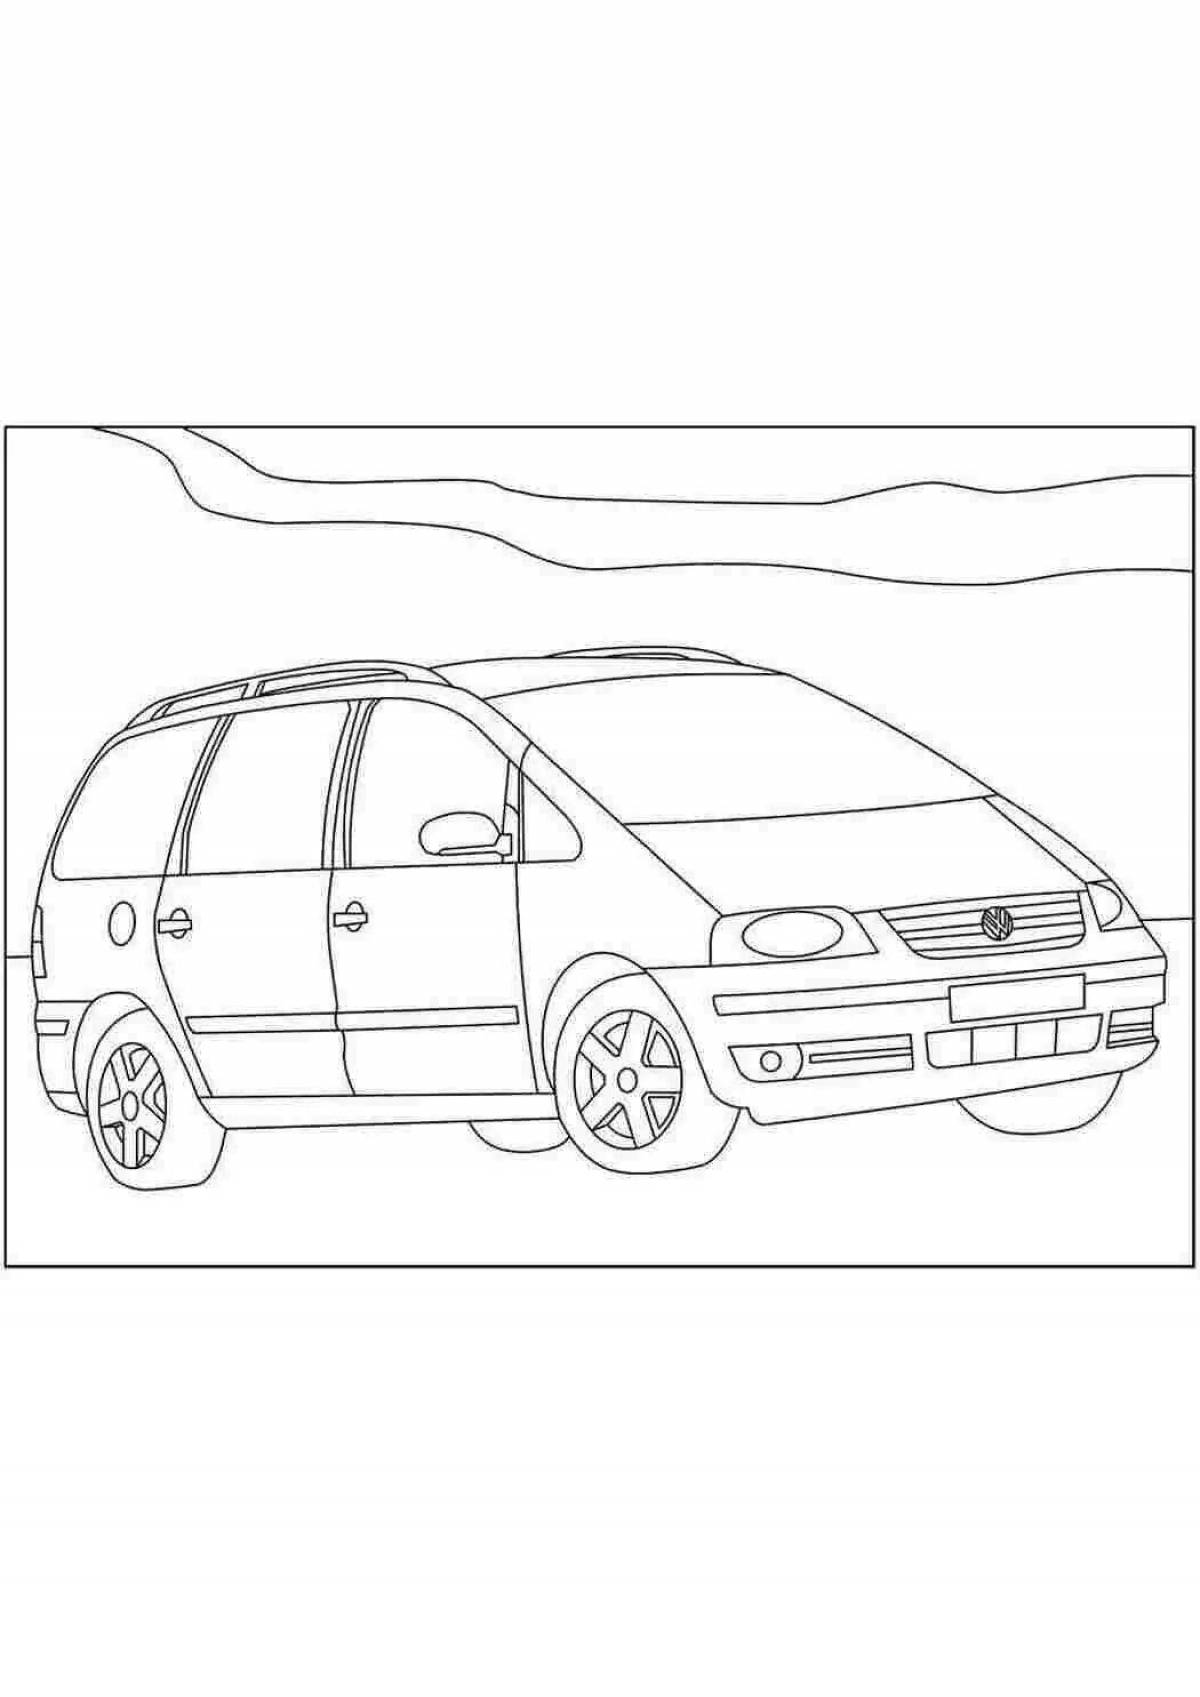 Coloring page adorable volkswagen cars